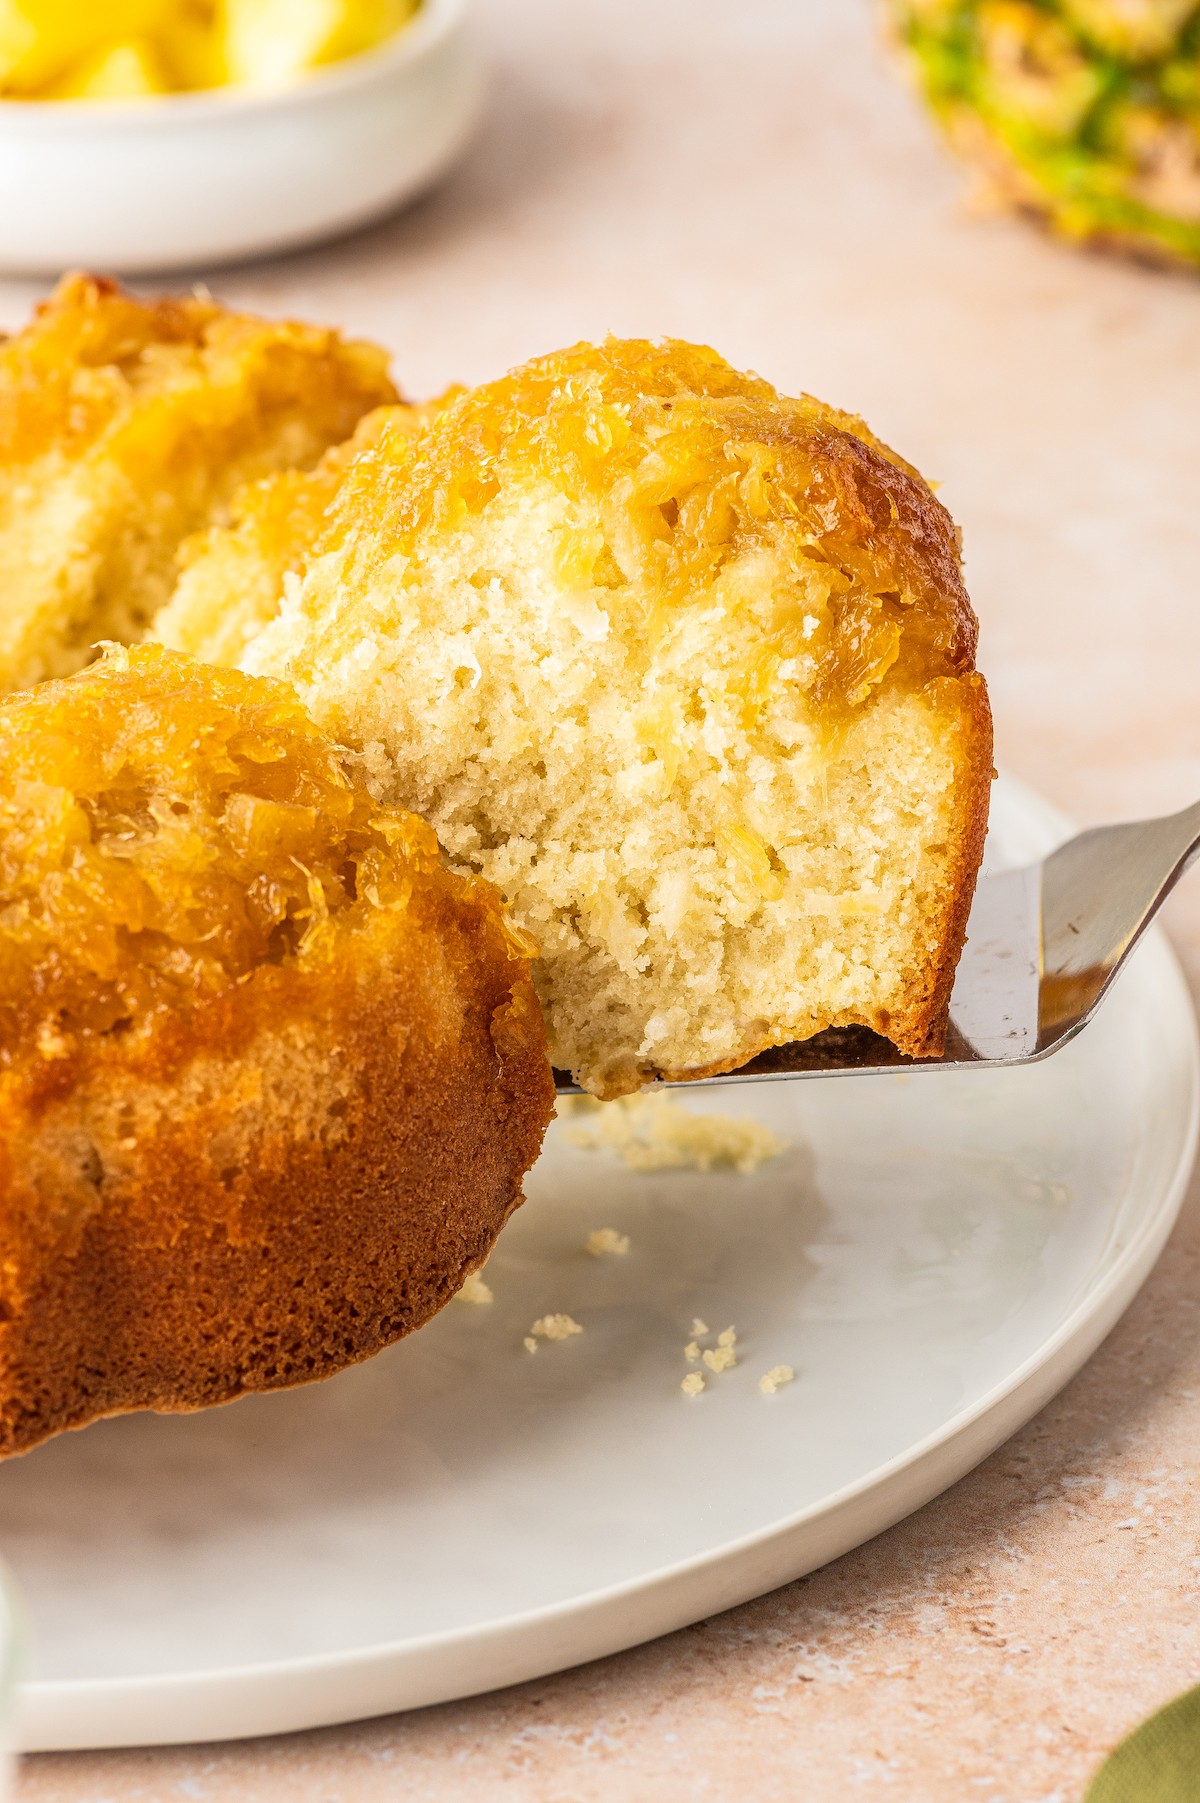 Lifting a slice of pineapple coconut bundt cake with a cake server.